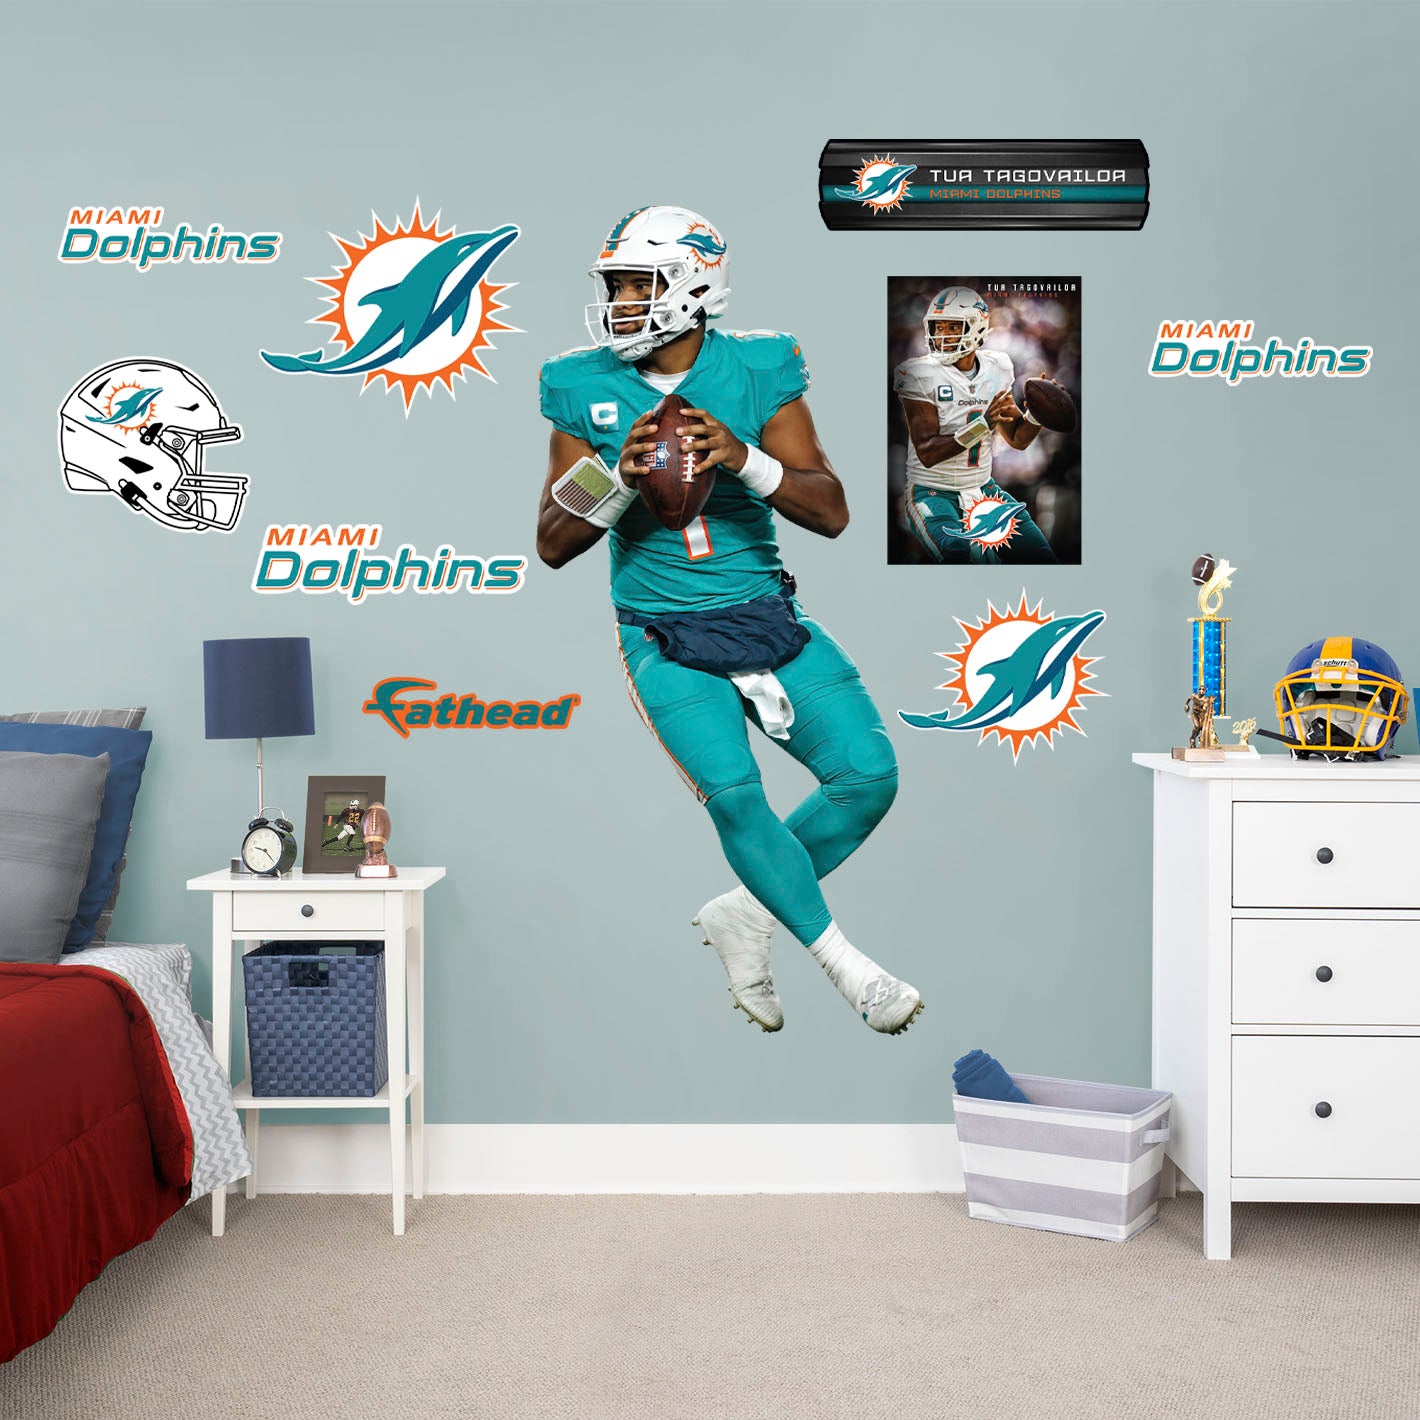 Miami Dolphins: Tua Tagovailoa - Officially Licensed NFL Removable Adhesive Decal